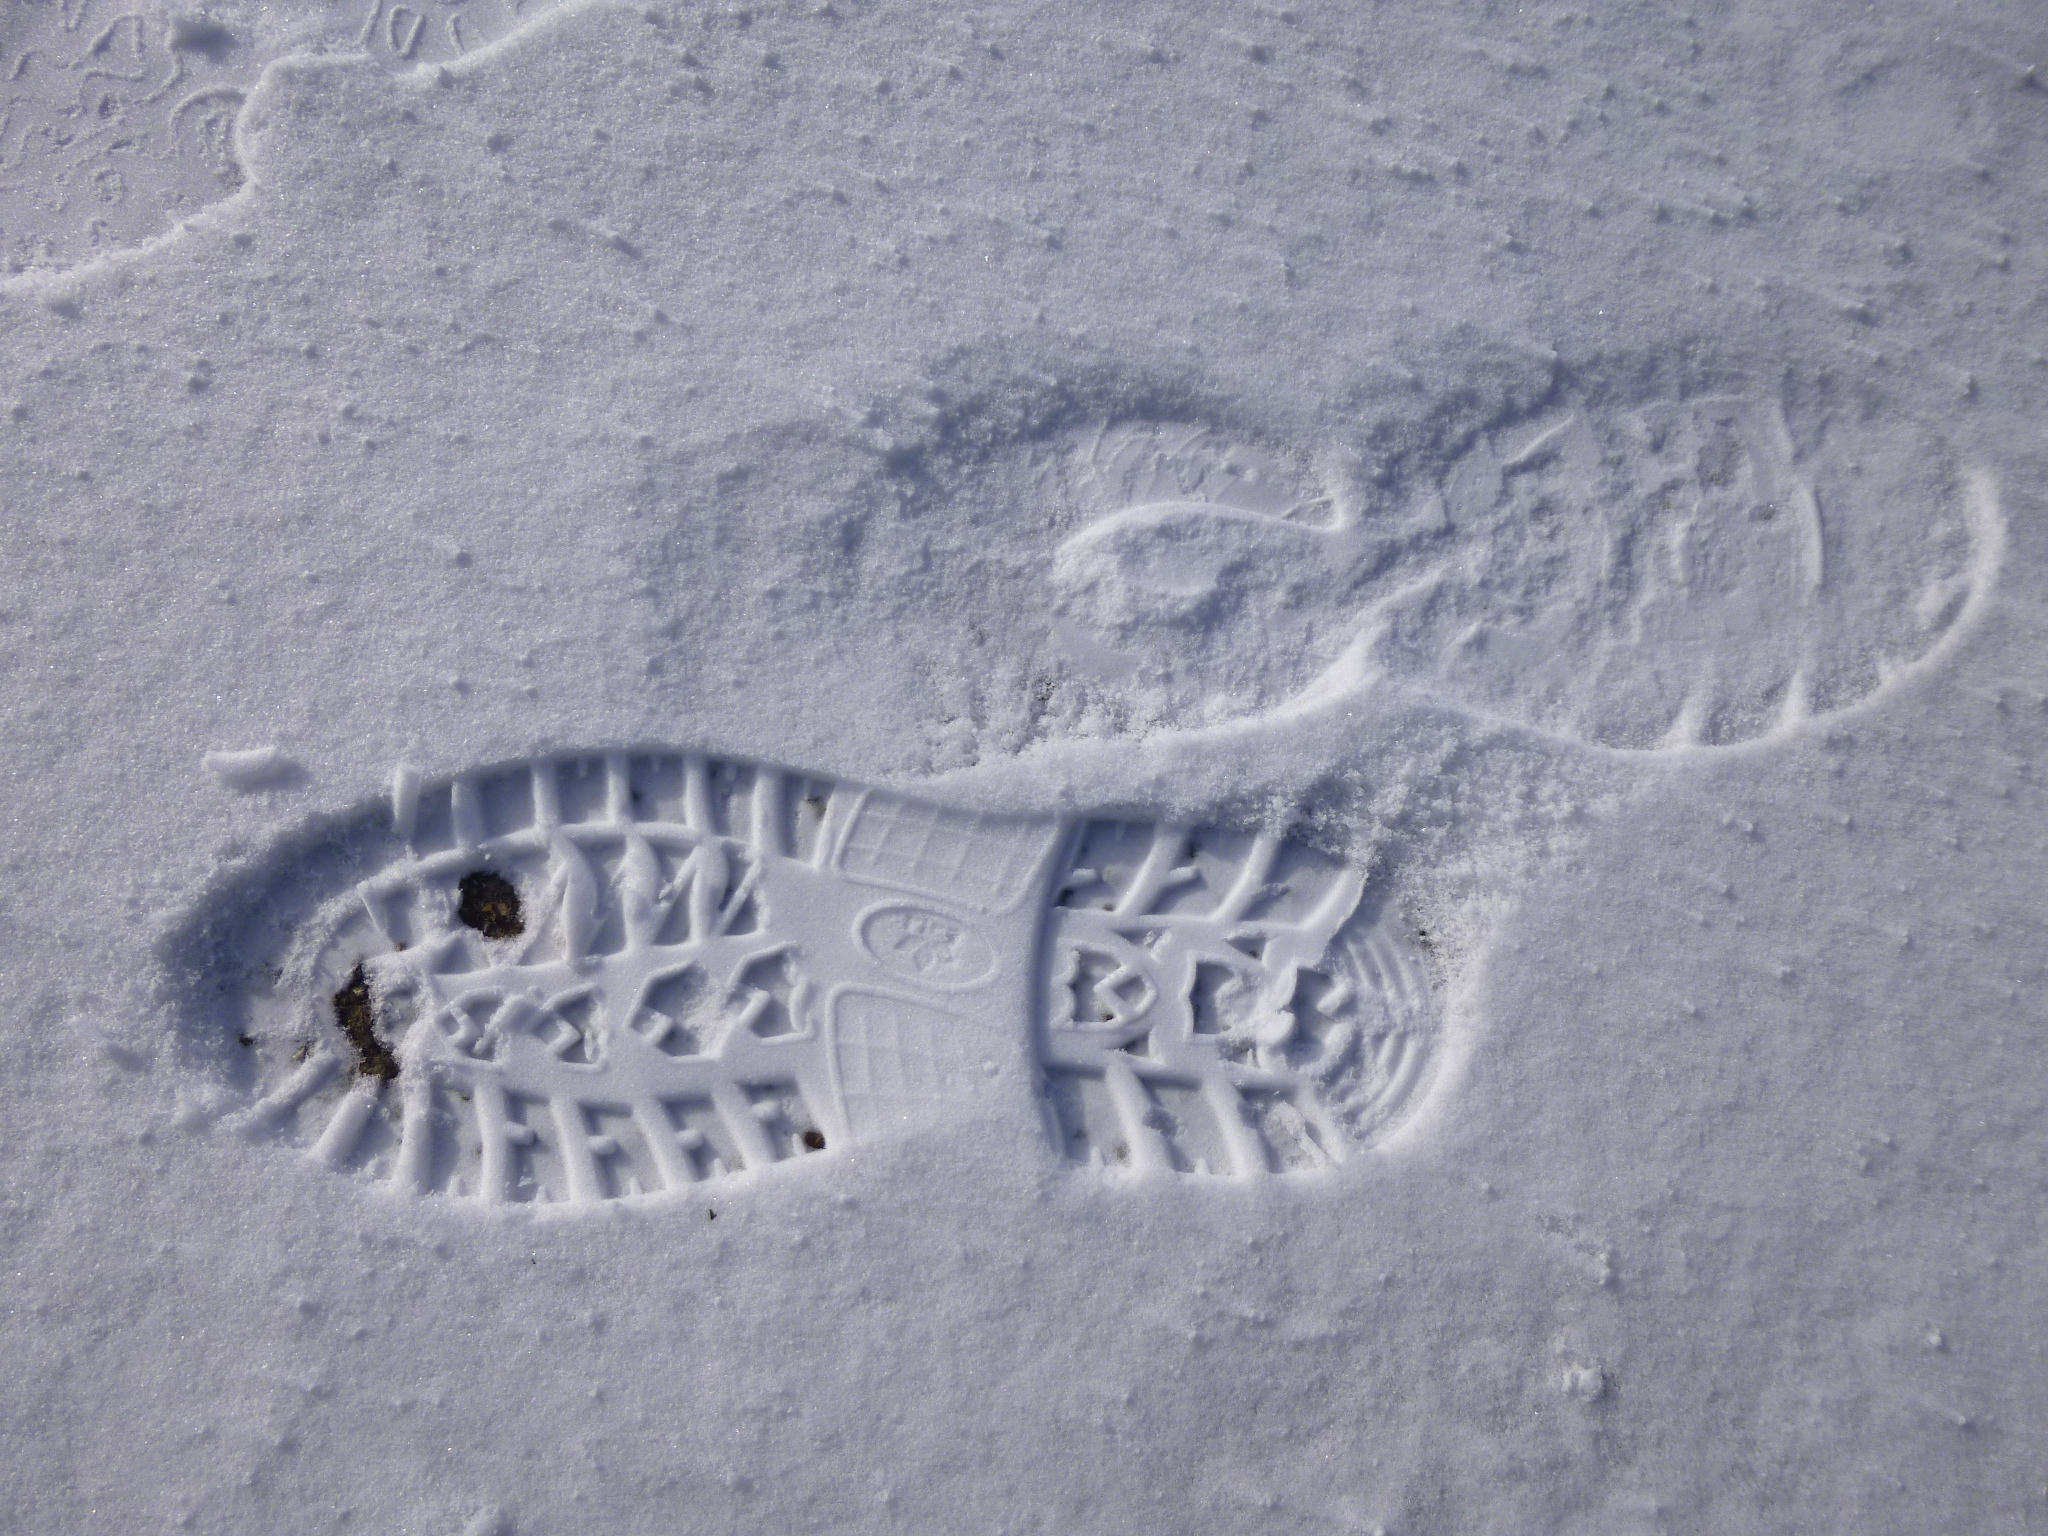 Footprint in snow photos found on the web.